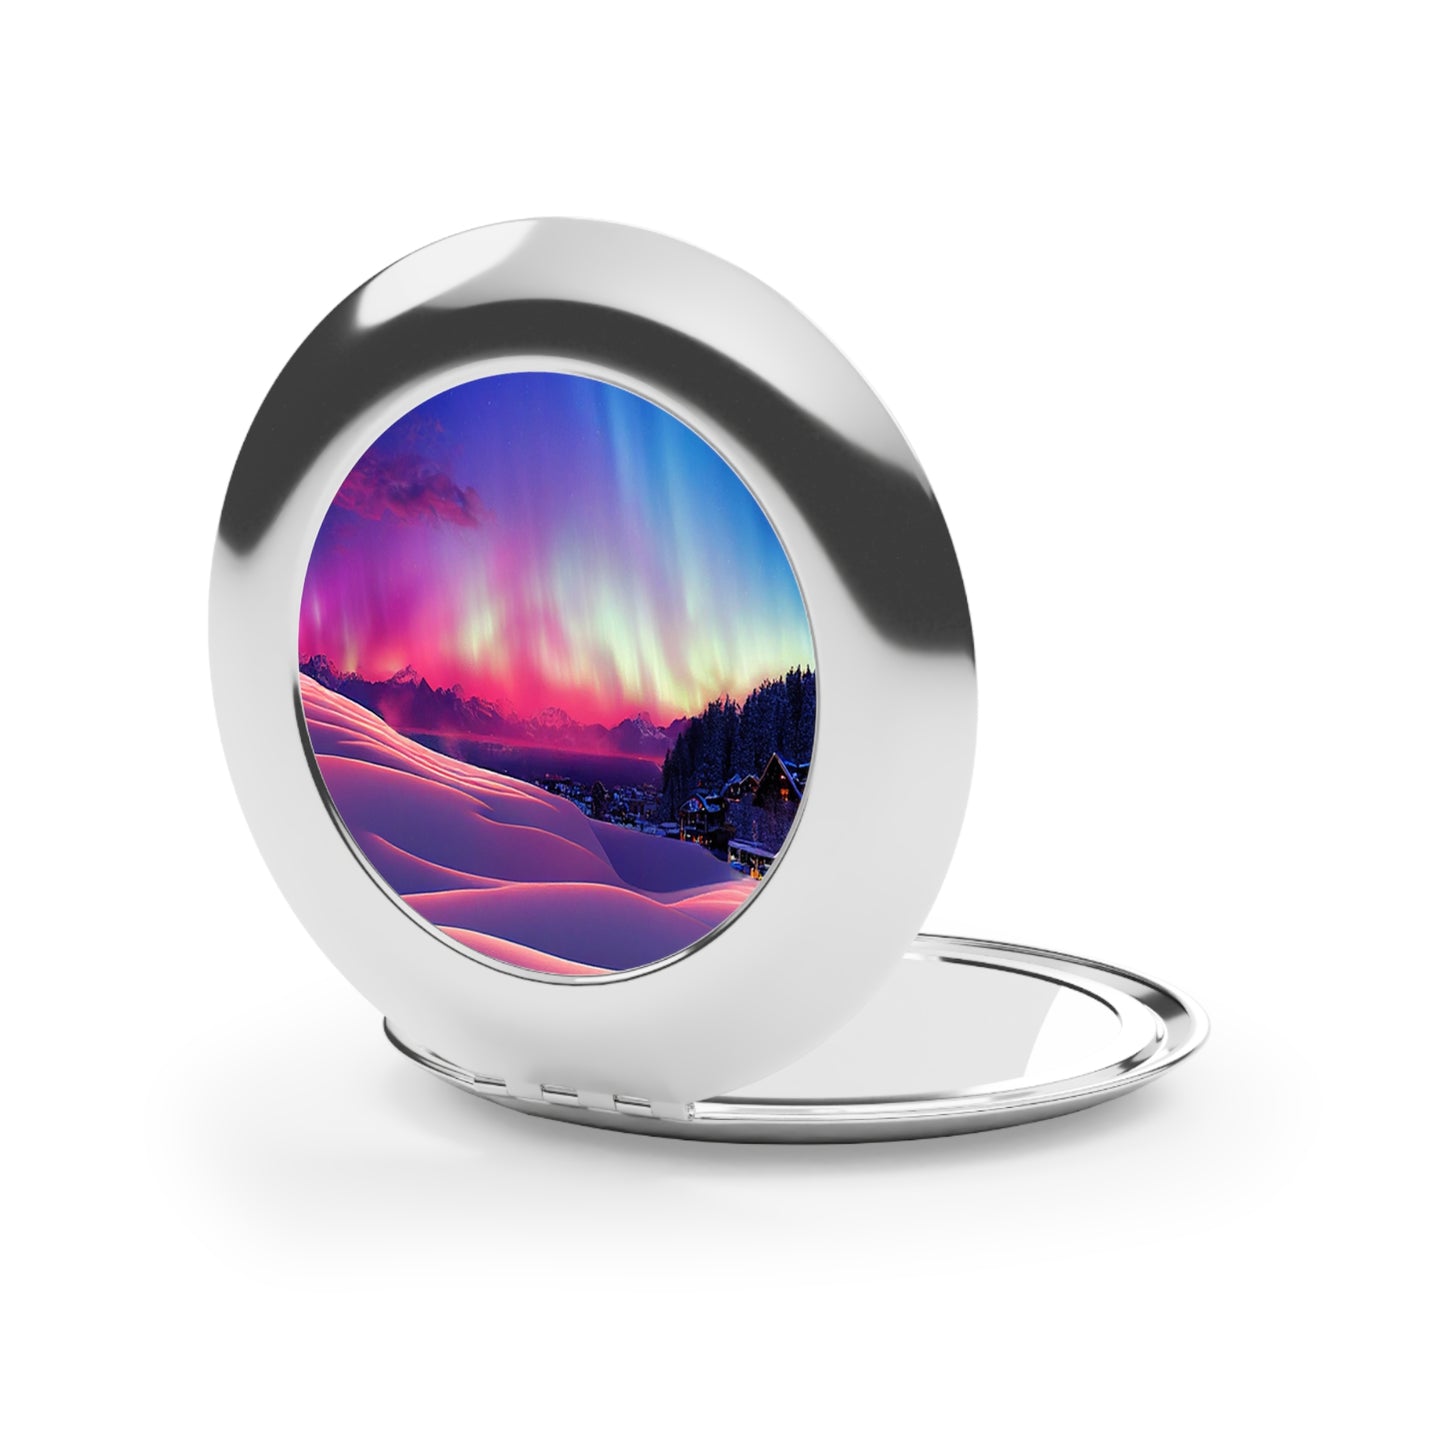 Unique Aurora Borealis Compact Travel Mirror - Northern Light Travel Accessories - Glossy Makeup Gadget - Perfect Aurora Lovers Gift 2